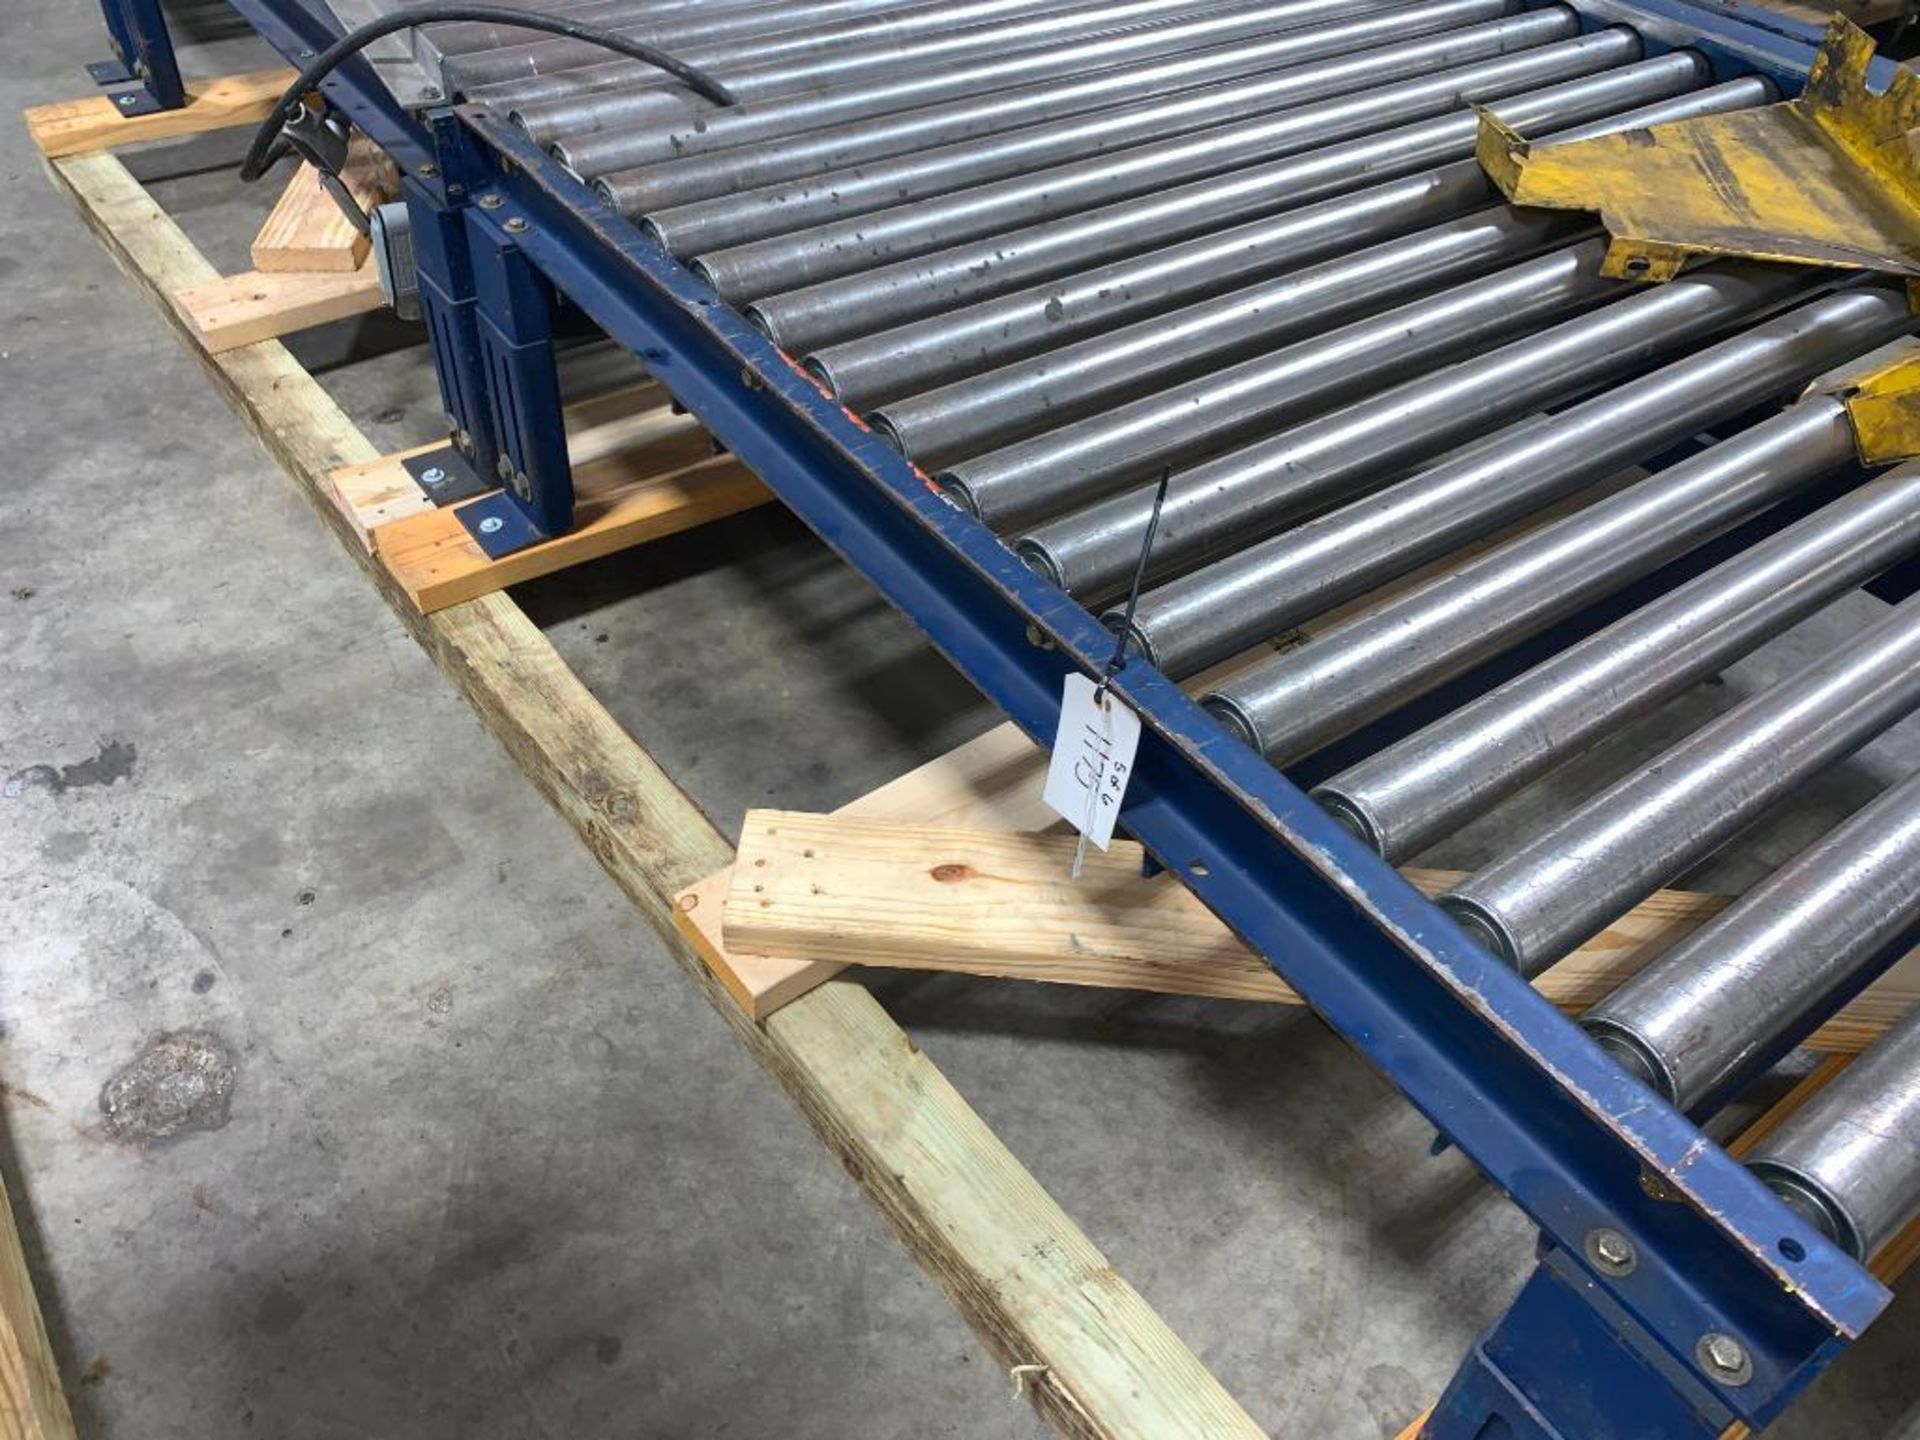 (6) skids of Lantech full pallet conveyor including turntable section - Located in Tifton, GA - Image 16 of 19